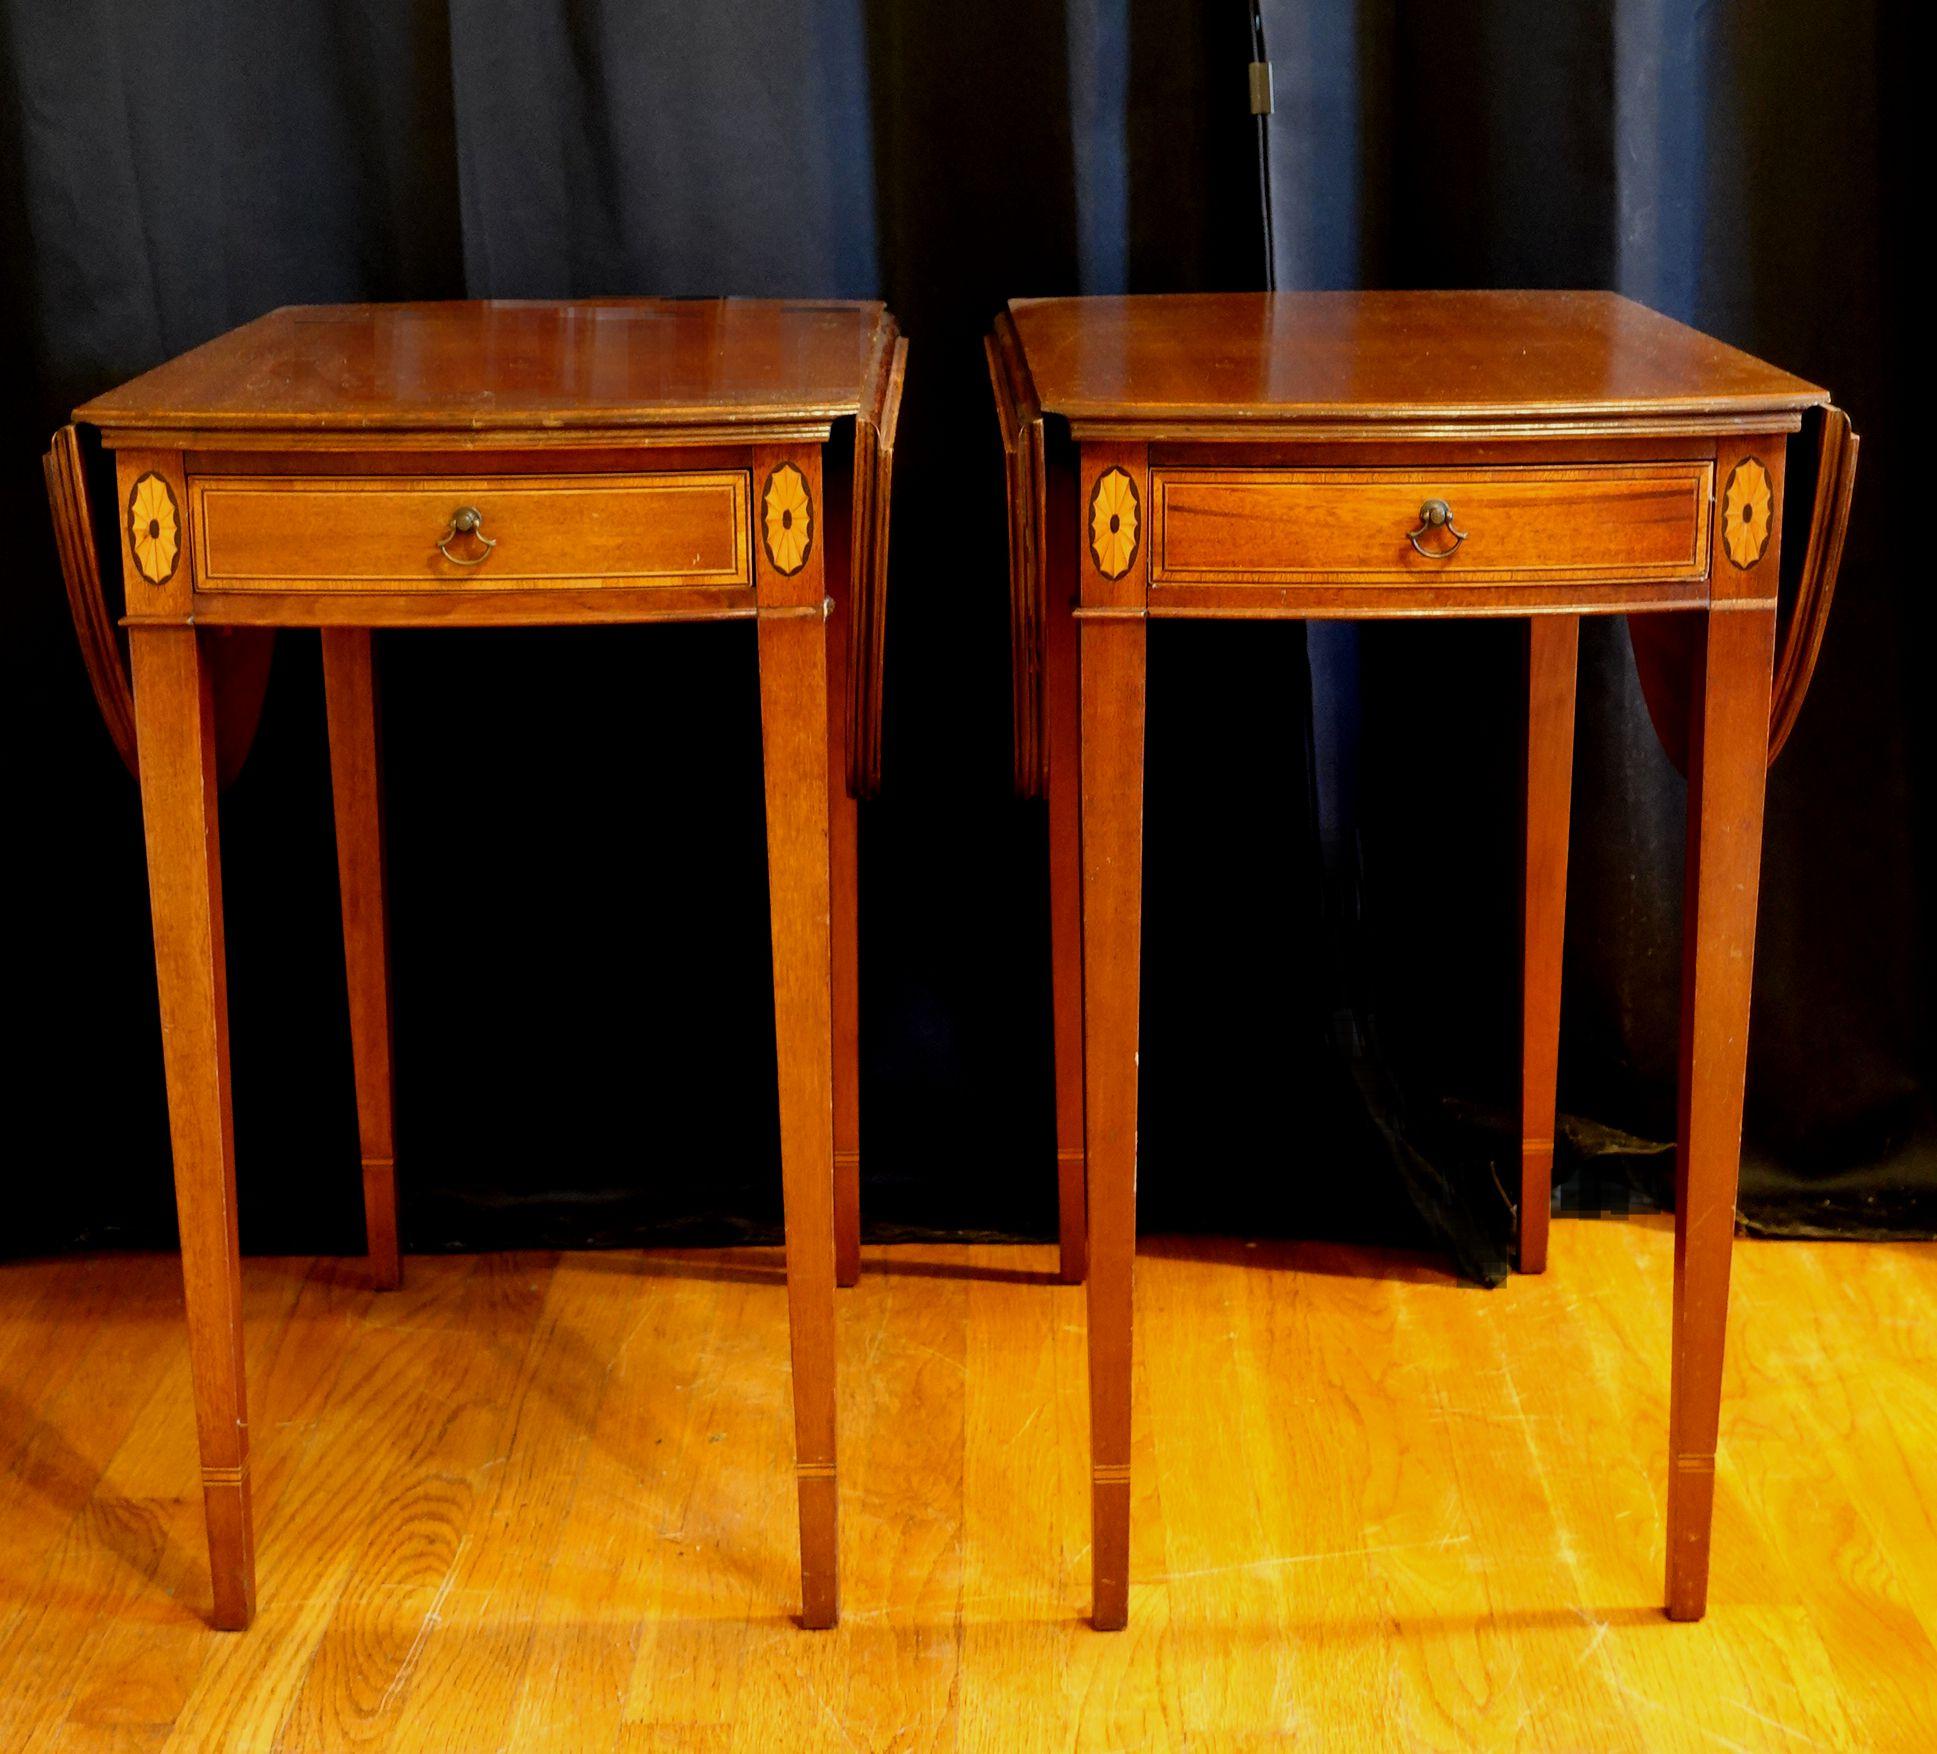 Antique pair mahogany banded pembroke drop-leaf extension side table with front drawer. Each table is in excellent antique condition. Minor wear consistent with age / use and some small missing sticks. Each side table measure 26.25 inches high x